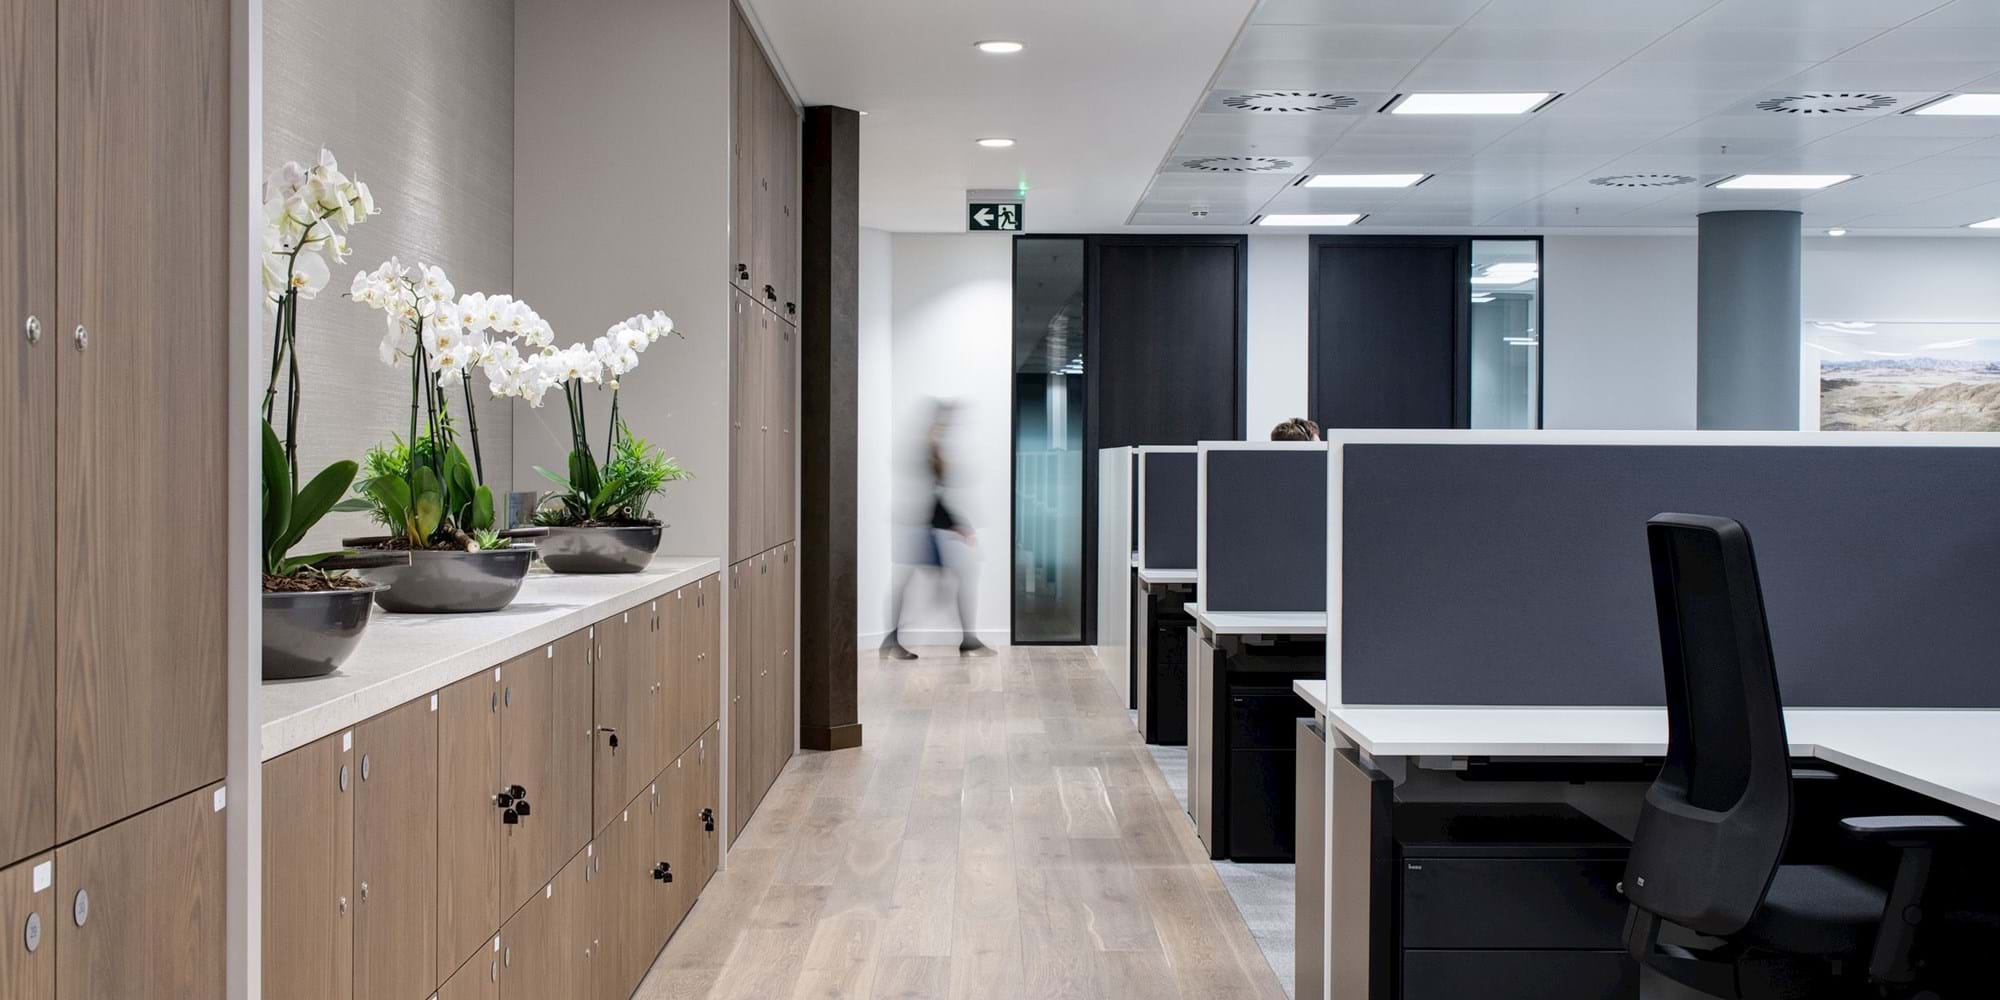 Modus Workspace office design, fit out and refurbishment - Dimension Data - Dimension Data 17 highres sRGB.jpg